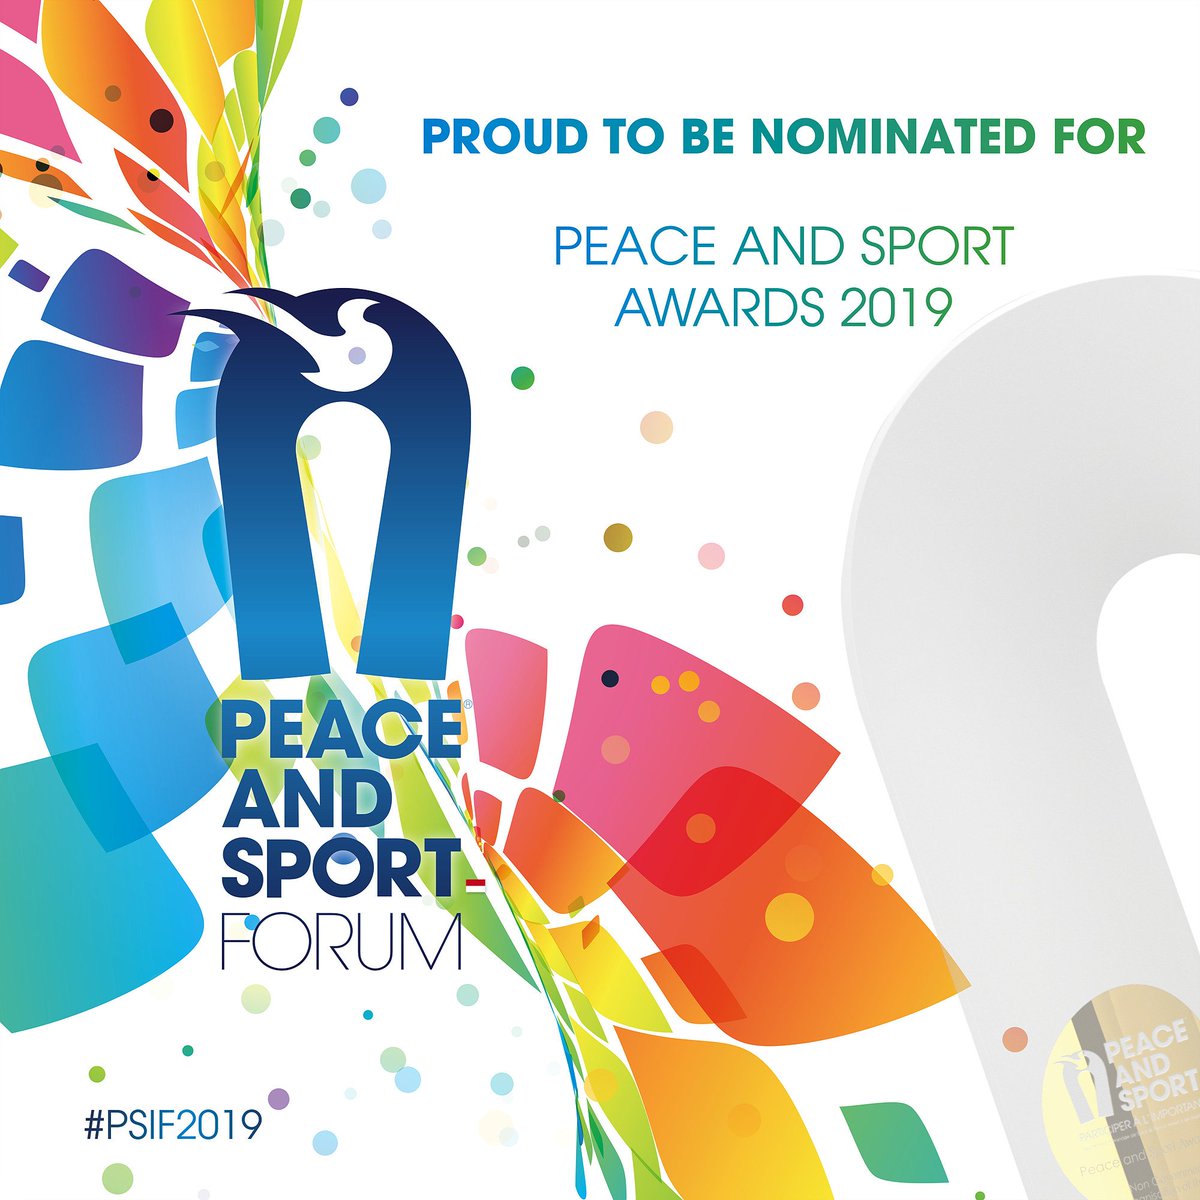 We are delighted to announce that WT has been nominated for 2019 Peace and Sport Awards in the Diplomatic Action of the year! 

Winners will be known on December 12 during @peaceandsport International Forum in Monaco! 

#PSIF2019 #BePartOfWhatMatters #PSAWARDS